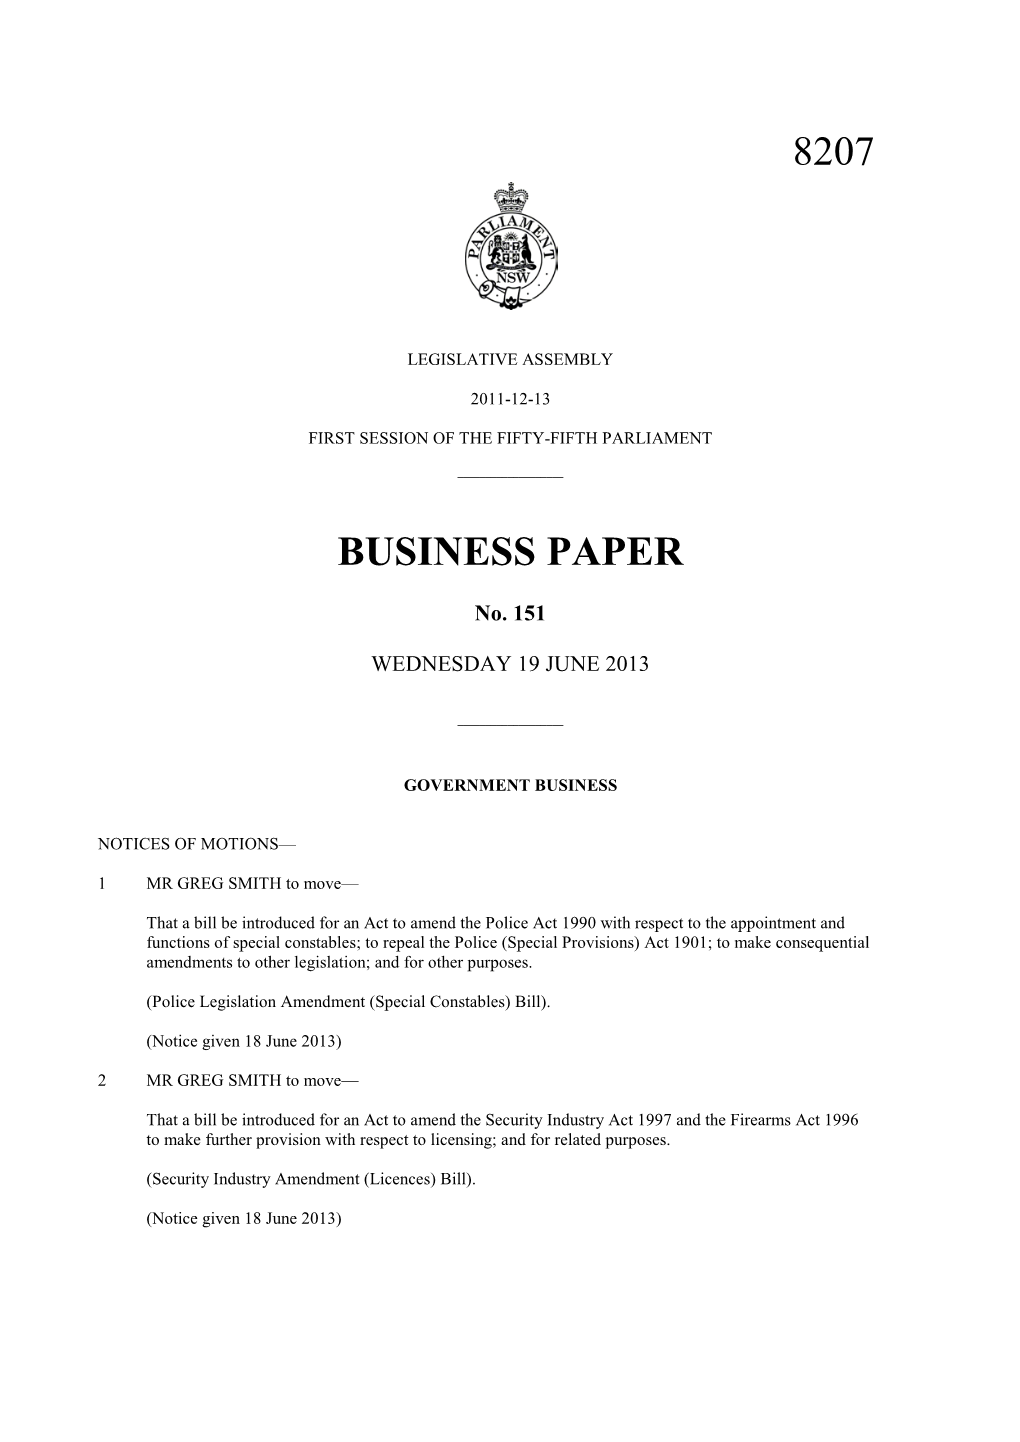 8207 Business Paper